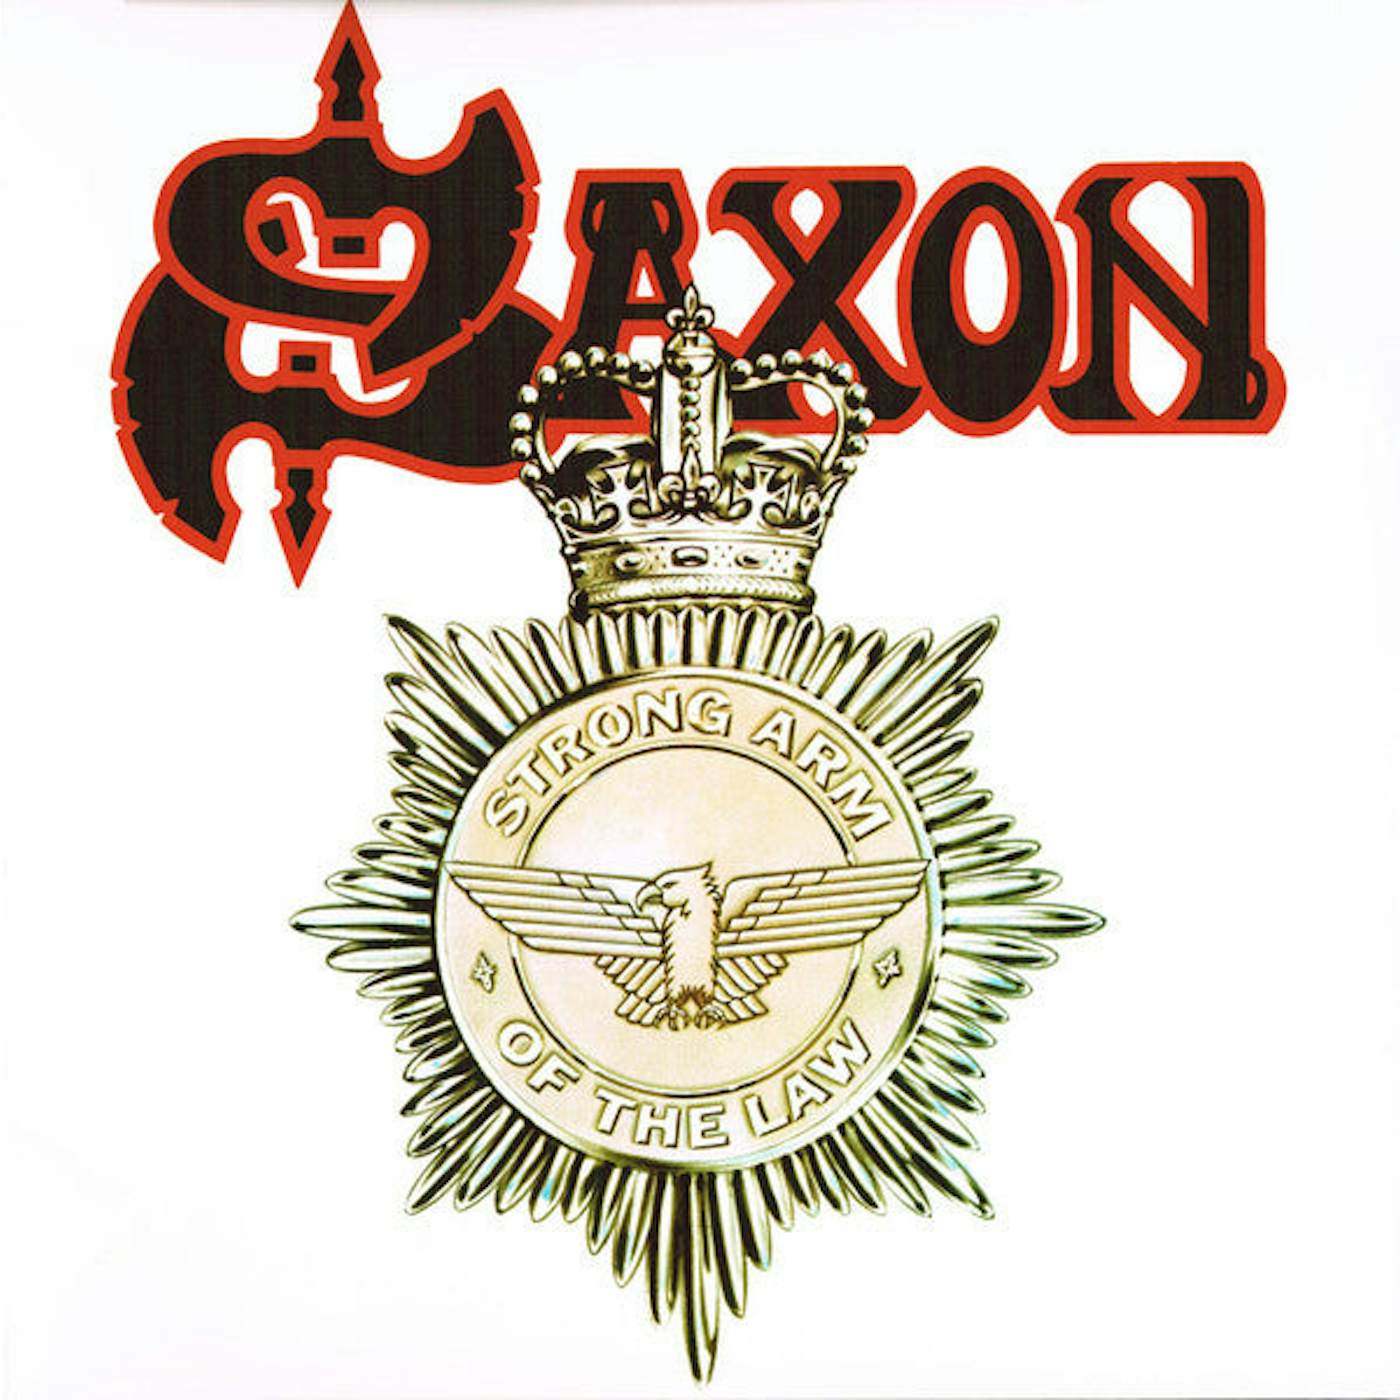 Saxon LP Vinyl Record - Strong Arm of the Law